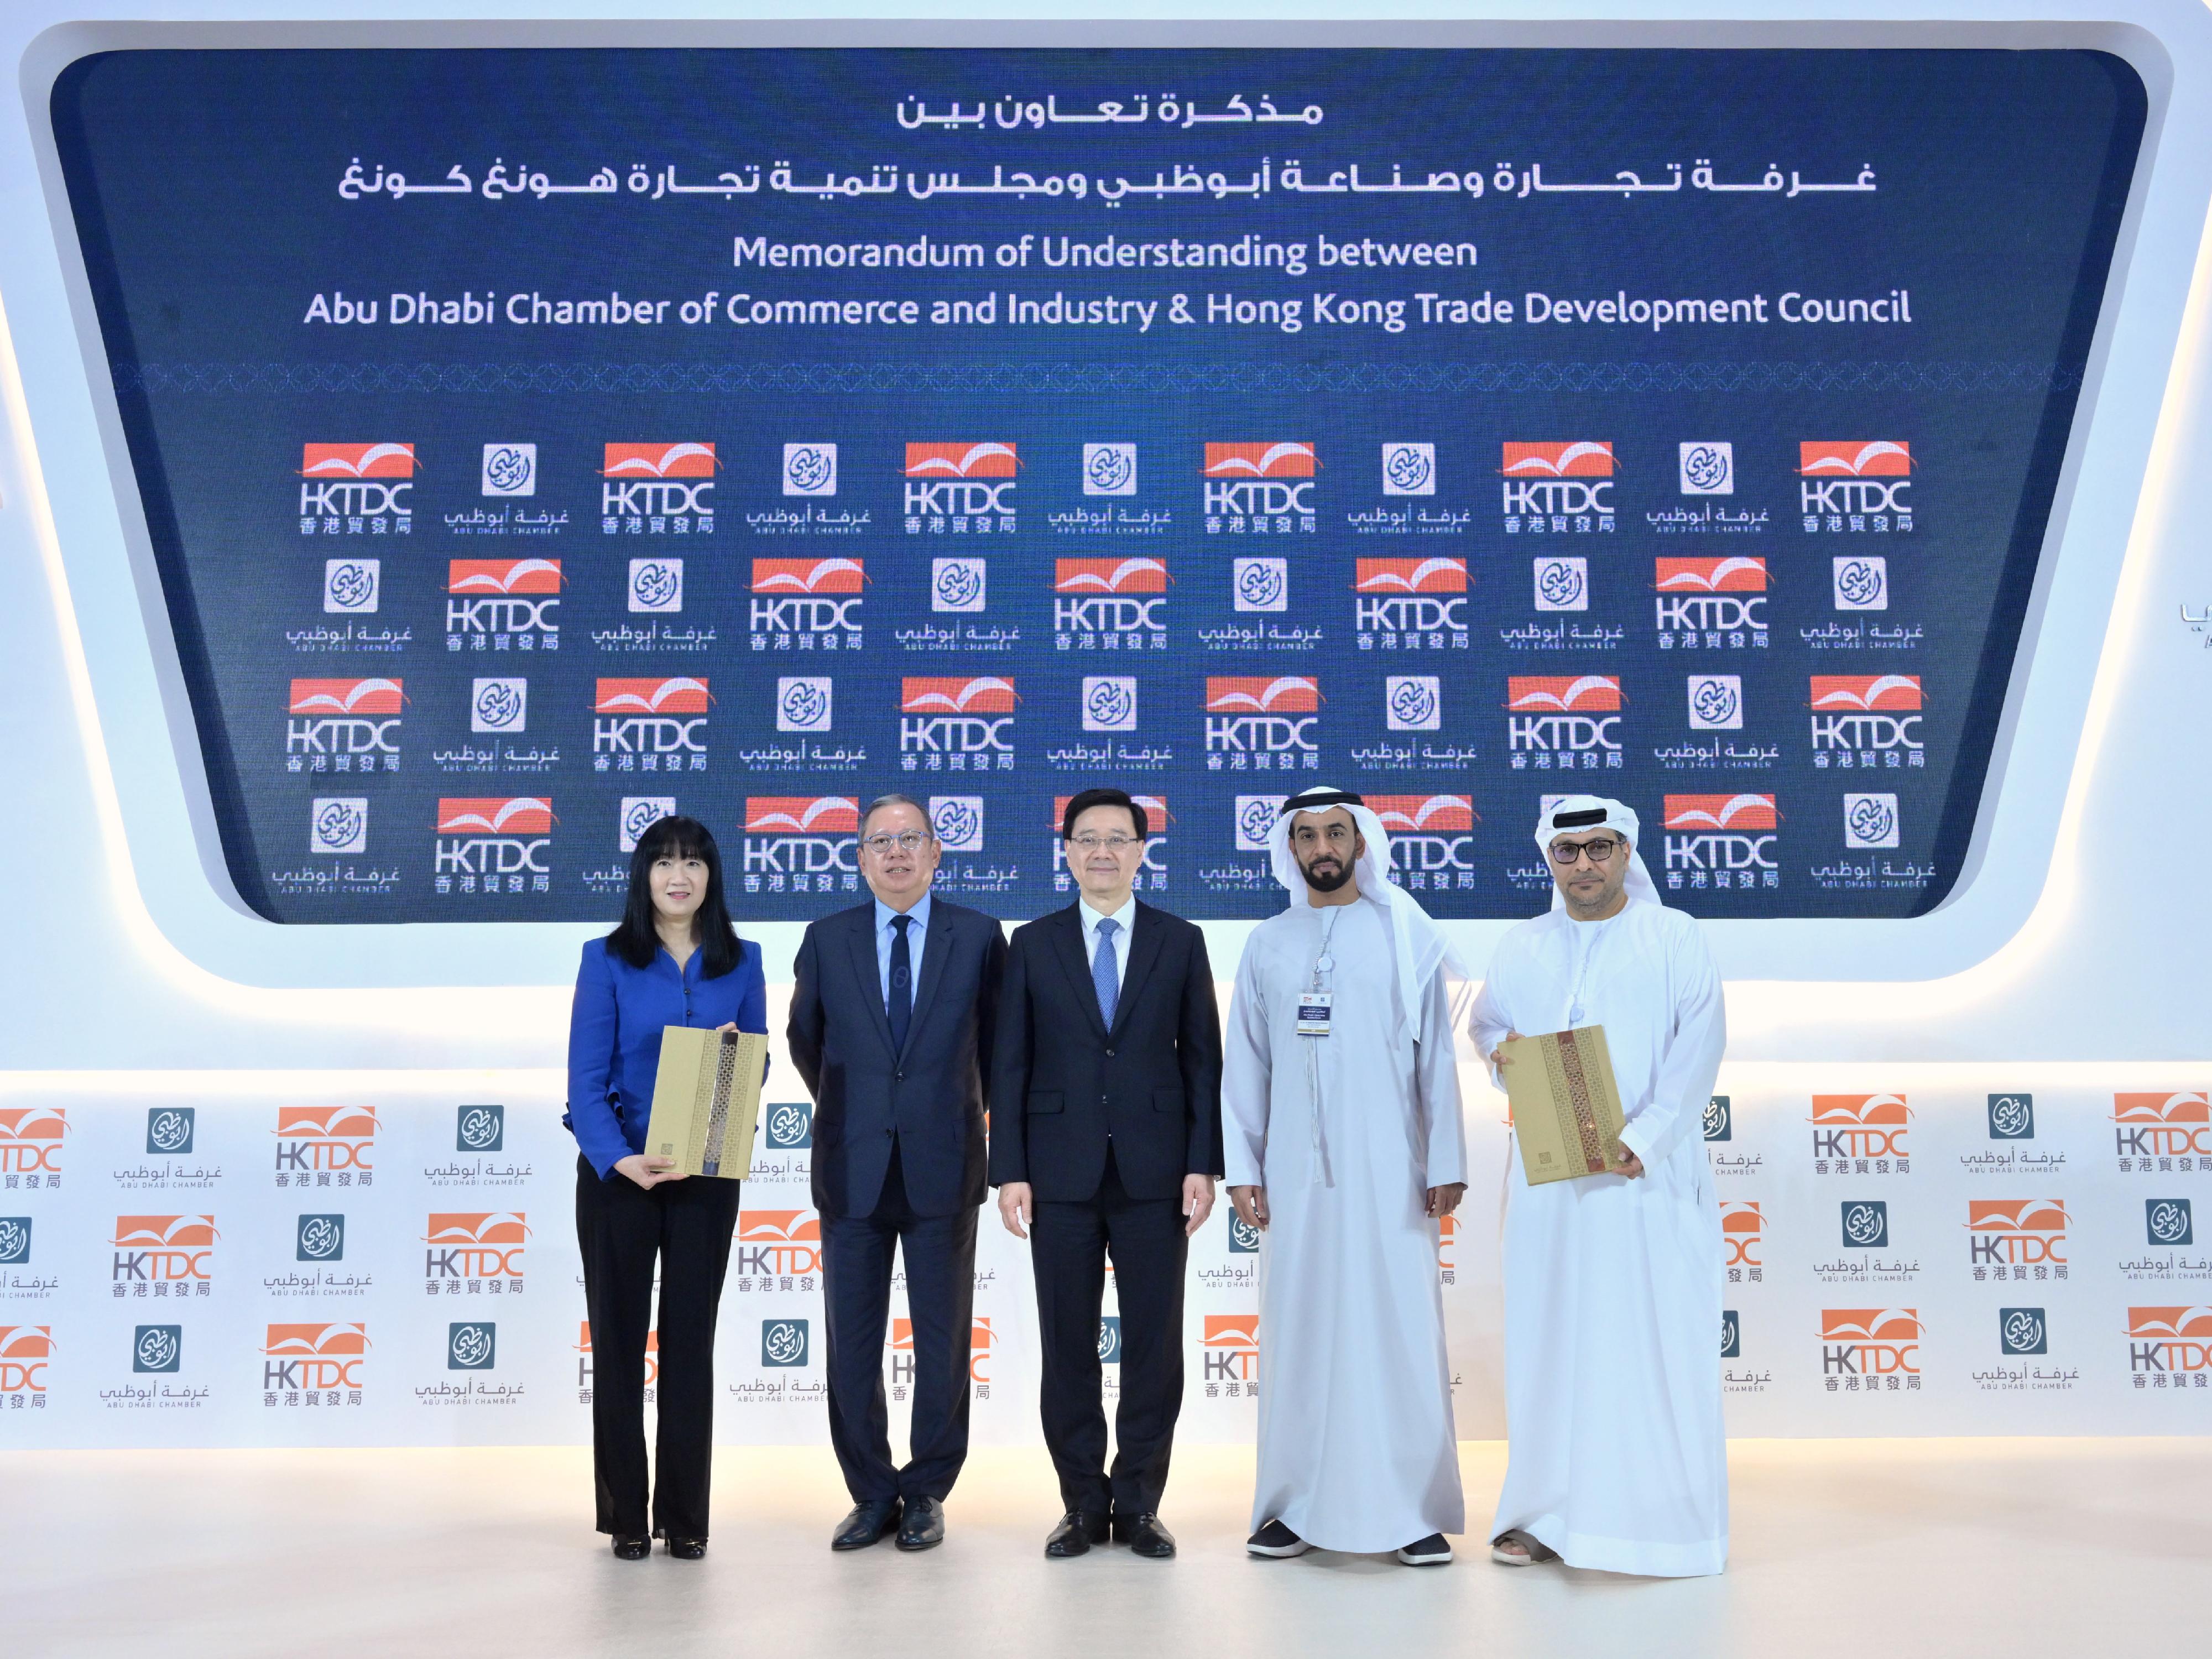 The Chief Executive, Mr John Lee, today (February 7, Abu Dhabi time) attended the Abu Dhabi-Hong Kong Business Forum and networking luncheon hosted by the Abu Dhabi Chamber of Commerce and Industry in Abu Dhabi, the United Arab Emirates. Photo shows Mr Lee (centre); the First Vice Chairman of the Abu Dhabi Chamber of Commerce and Industry, Dr Ali Saeed Bin Harmal Aldhaheri (second right); and the Chairman of the Hong Kong Trade Development Council, Dr Peter Lam (second left), witnessing the exchange of Memorandum of Understanding between the Hong Kong Trade Development Council and the Abu Dhabi Chamber of Commerce and Industry.